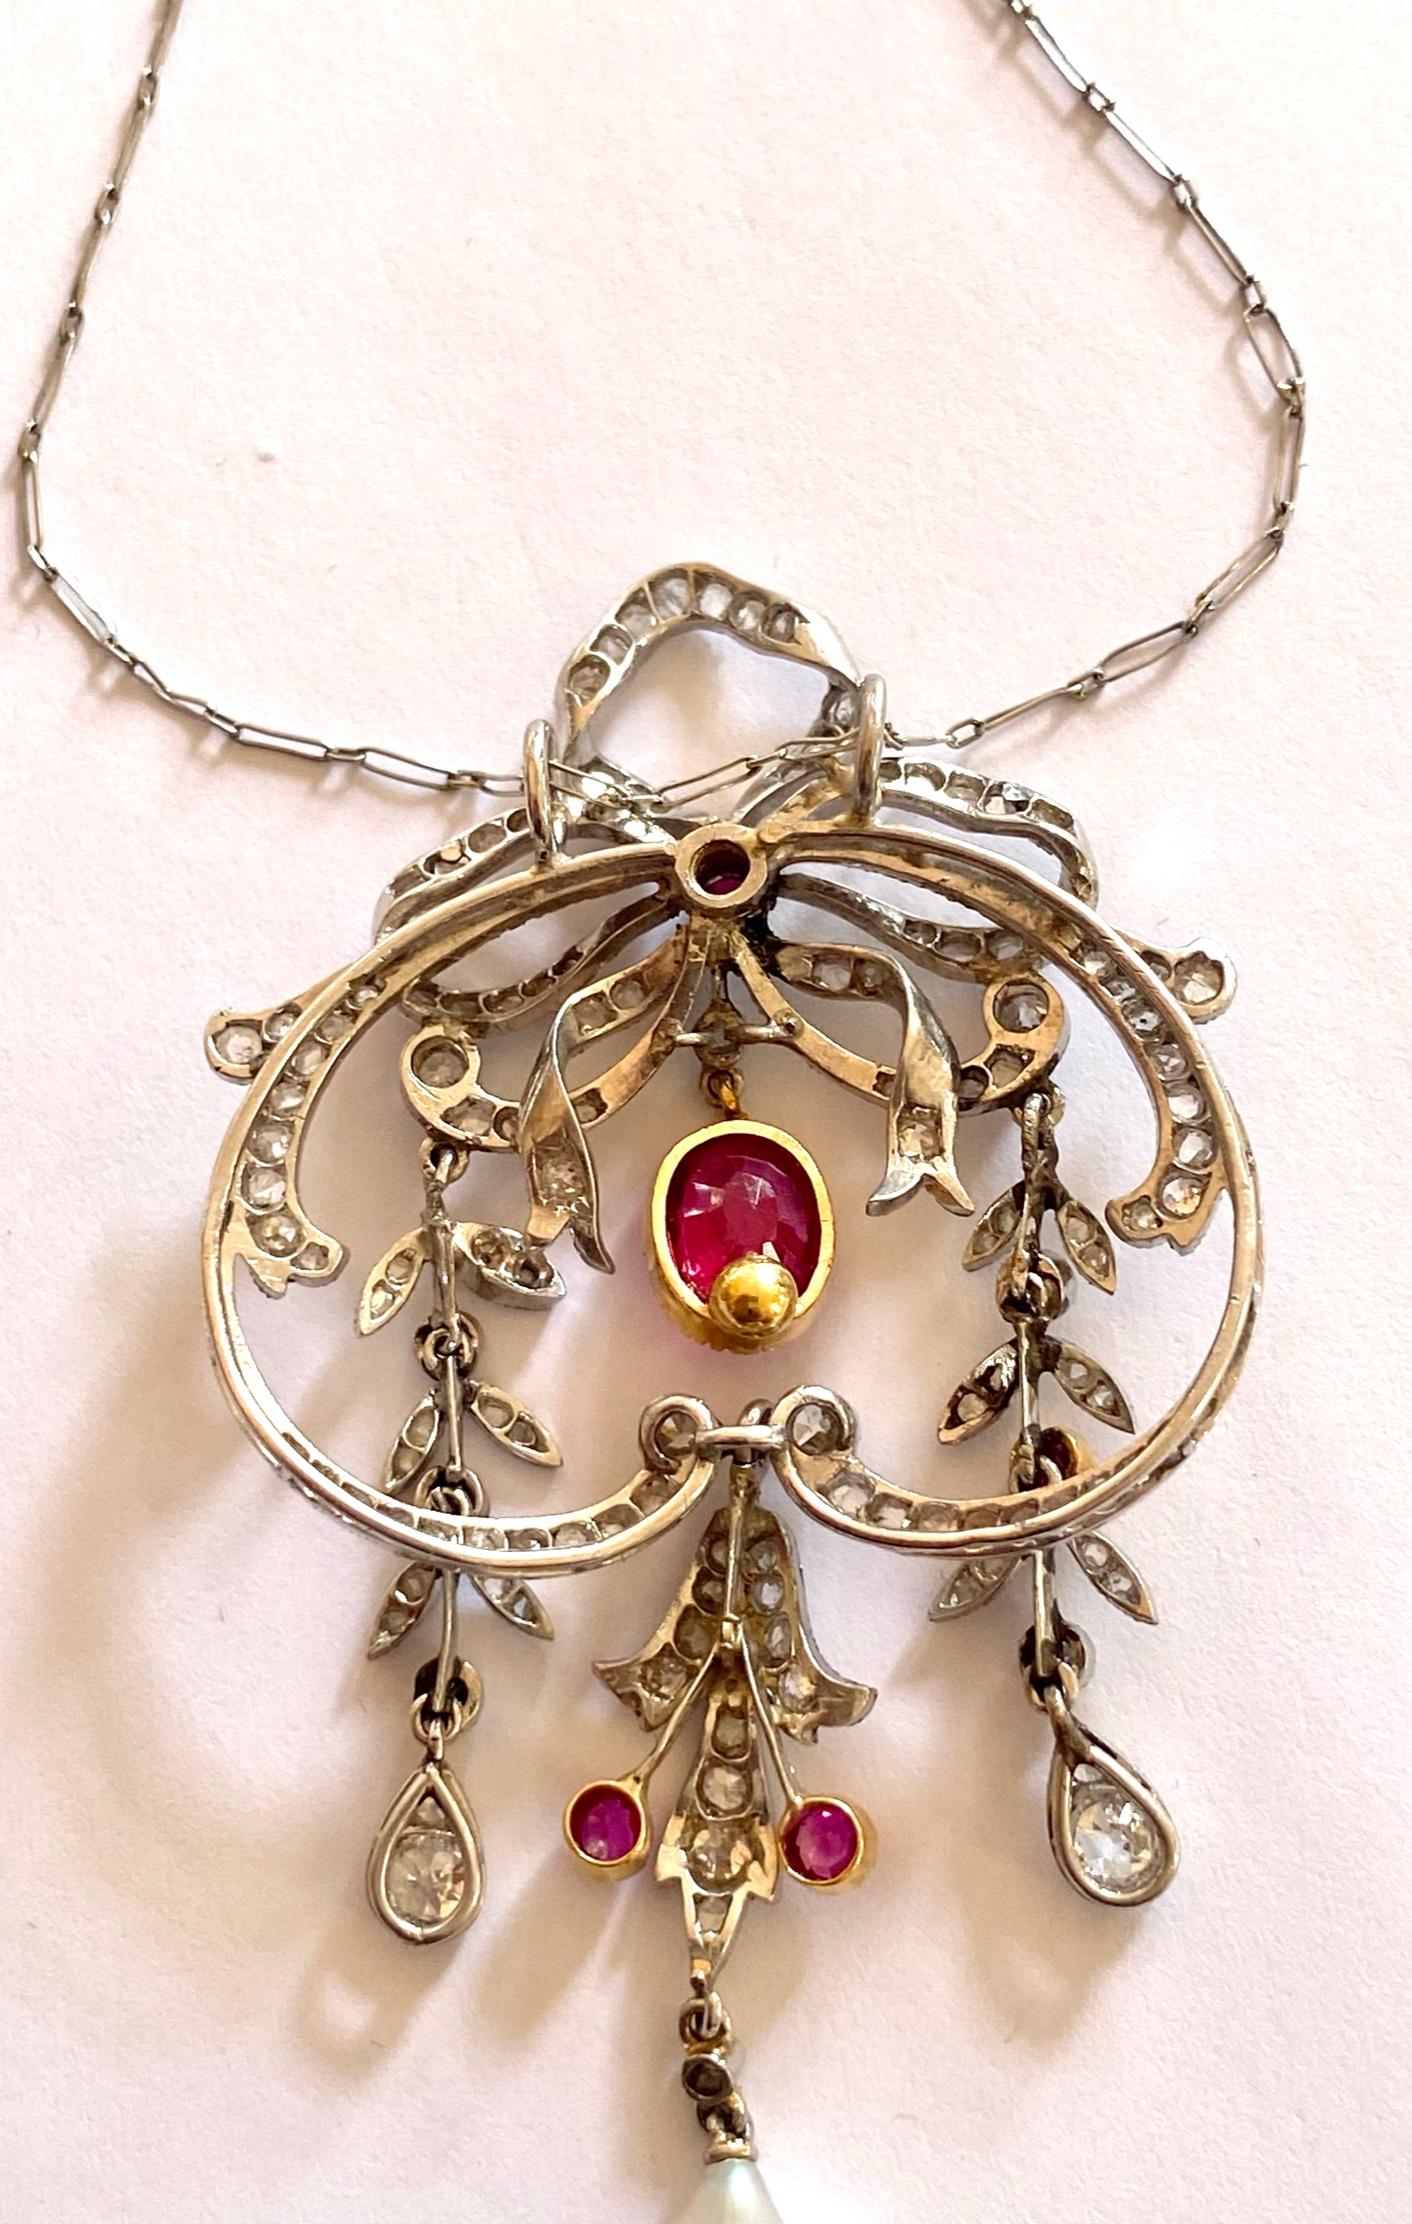 Edwardian Pendant with Chain / Brooch Platinum, Gold, Diamonds and Birma Ruby In Good Condition For Sale In Heerlen, NL